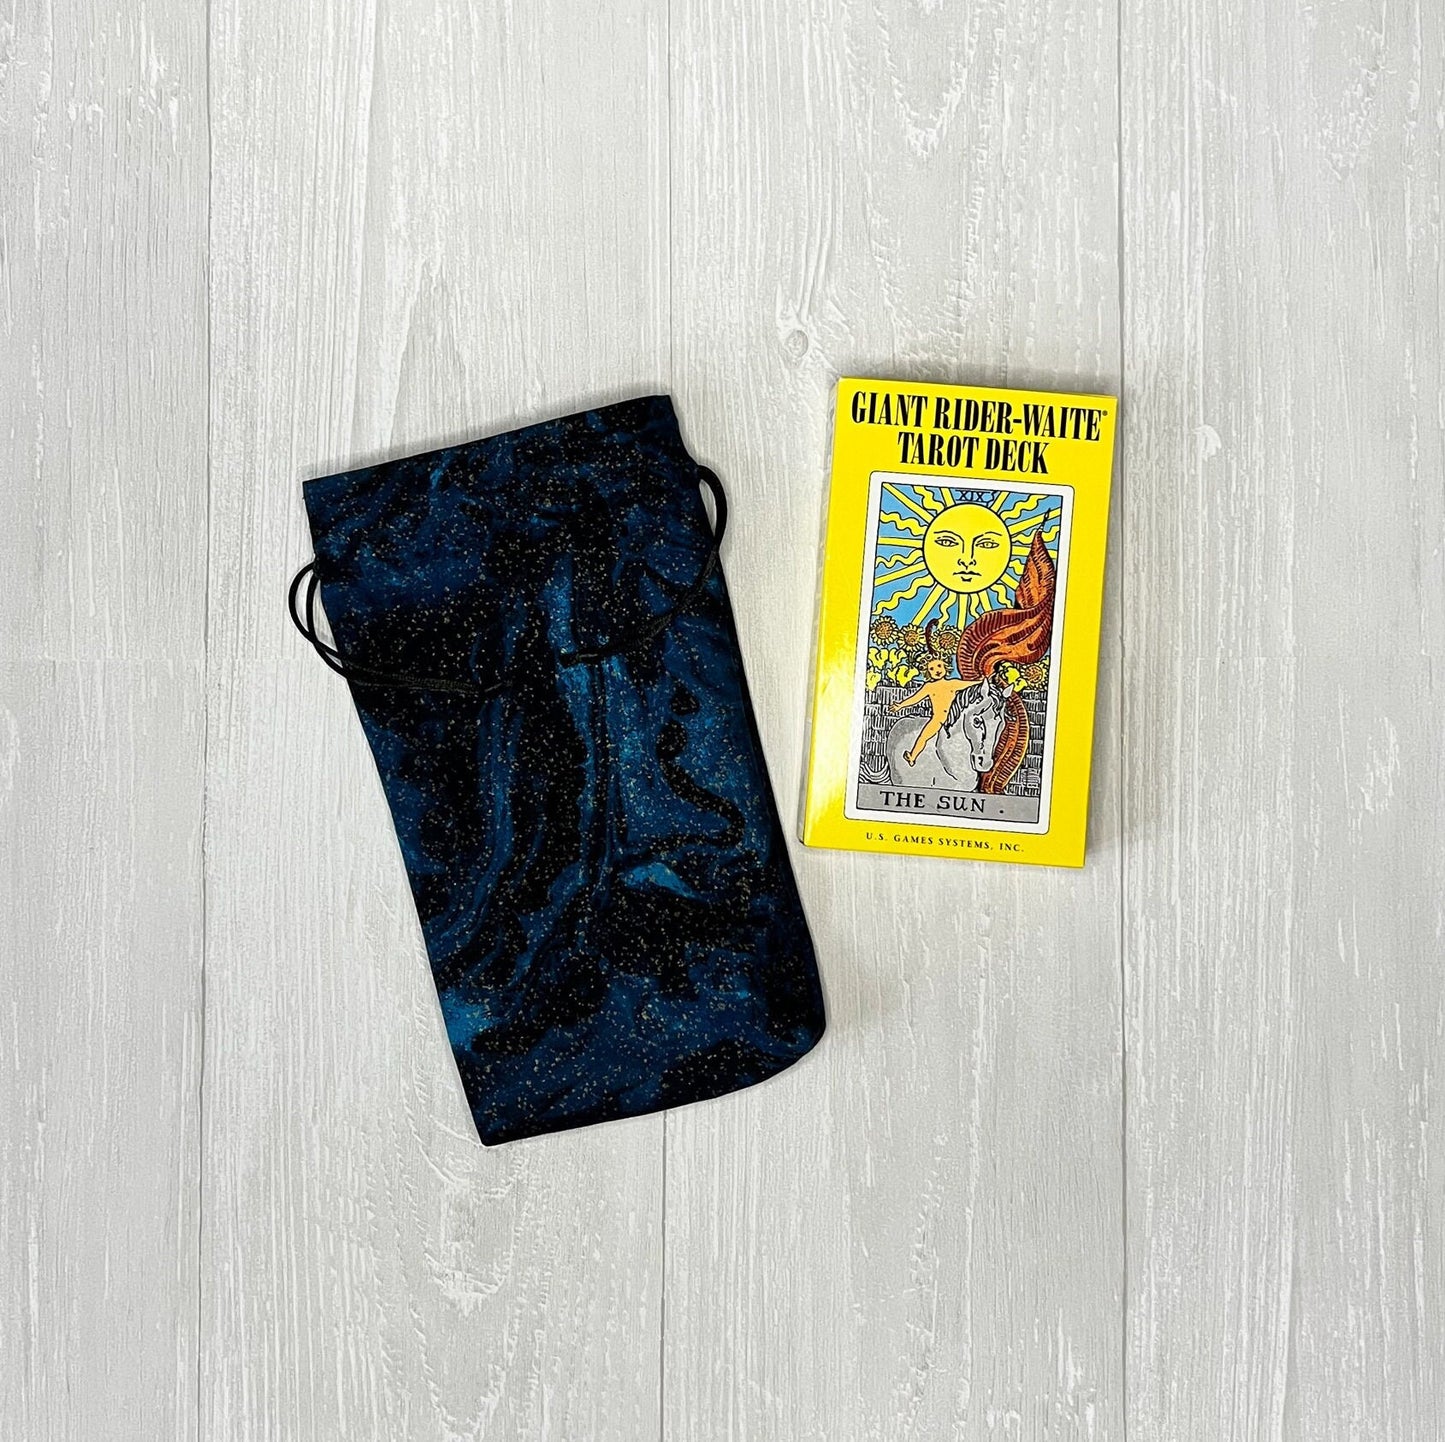 Large Tarot Bag, Drawstring Pouch for Tarot & Oracle Deck, Divination Tools, Giant Tarot Deck, Witchcraft and Wiccan Gift Supplies Celestial